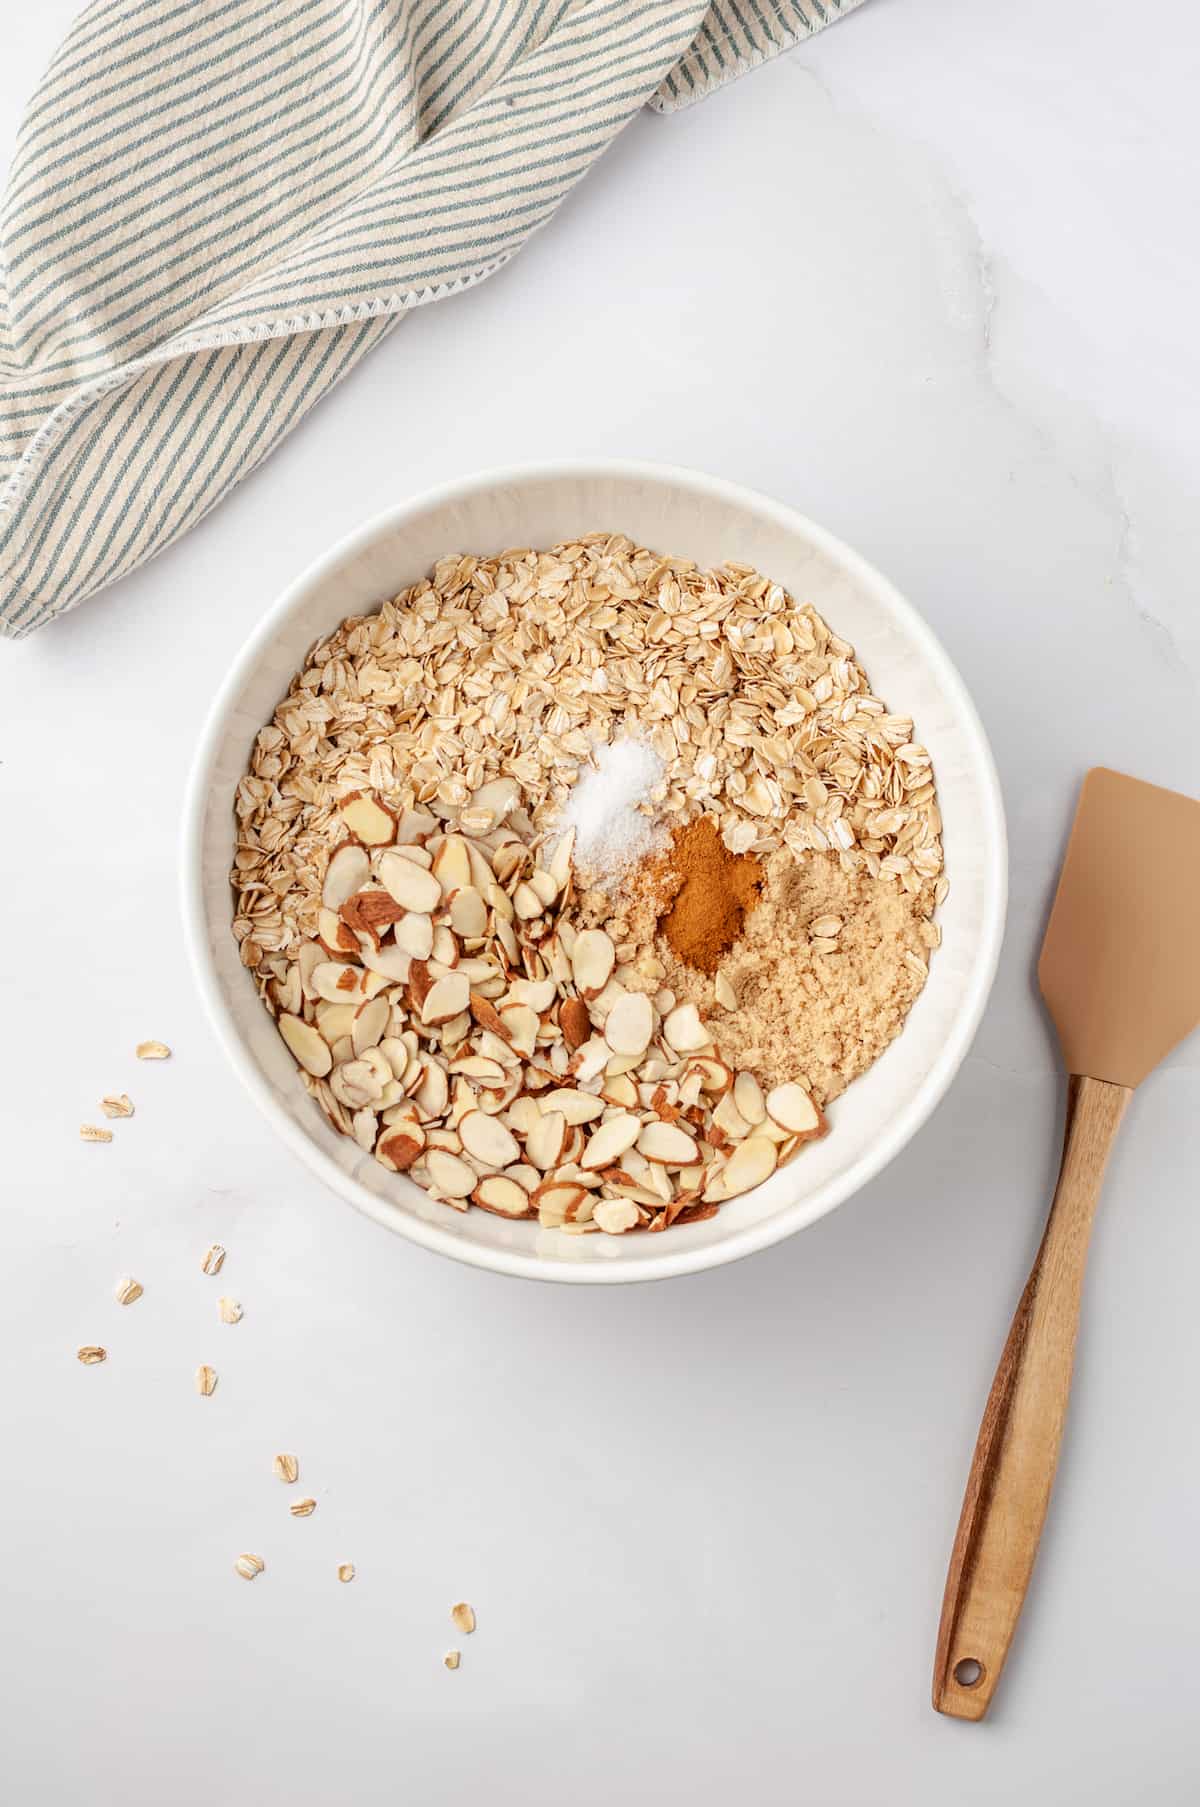 Overhead view of dry granola ingredients in mixing bowl